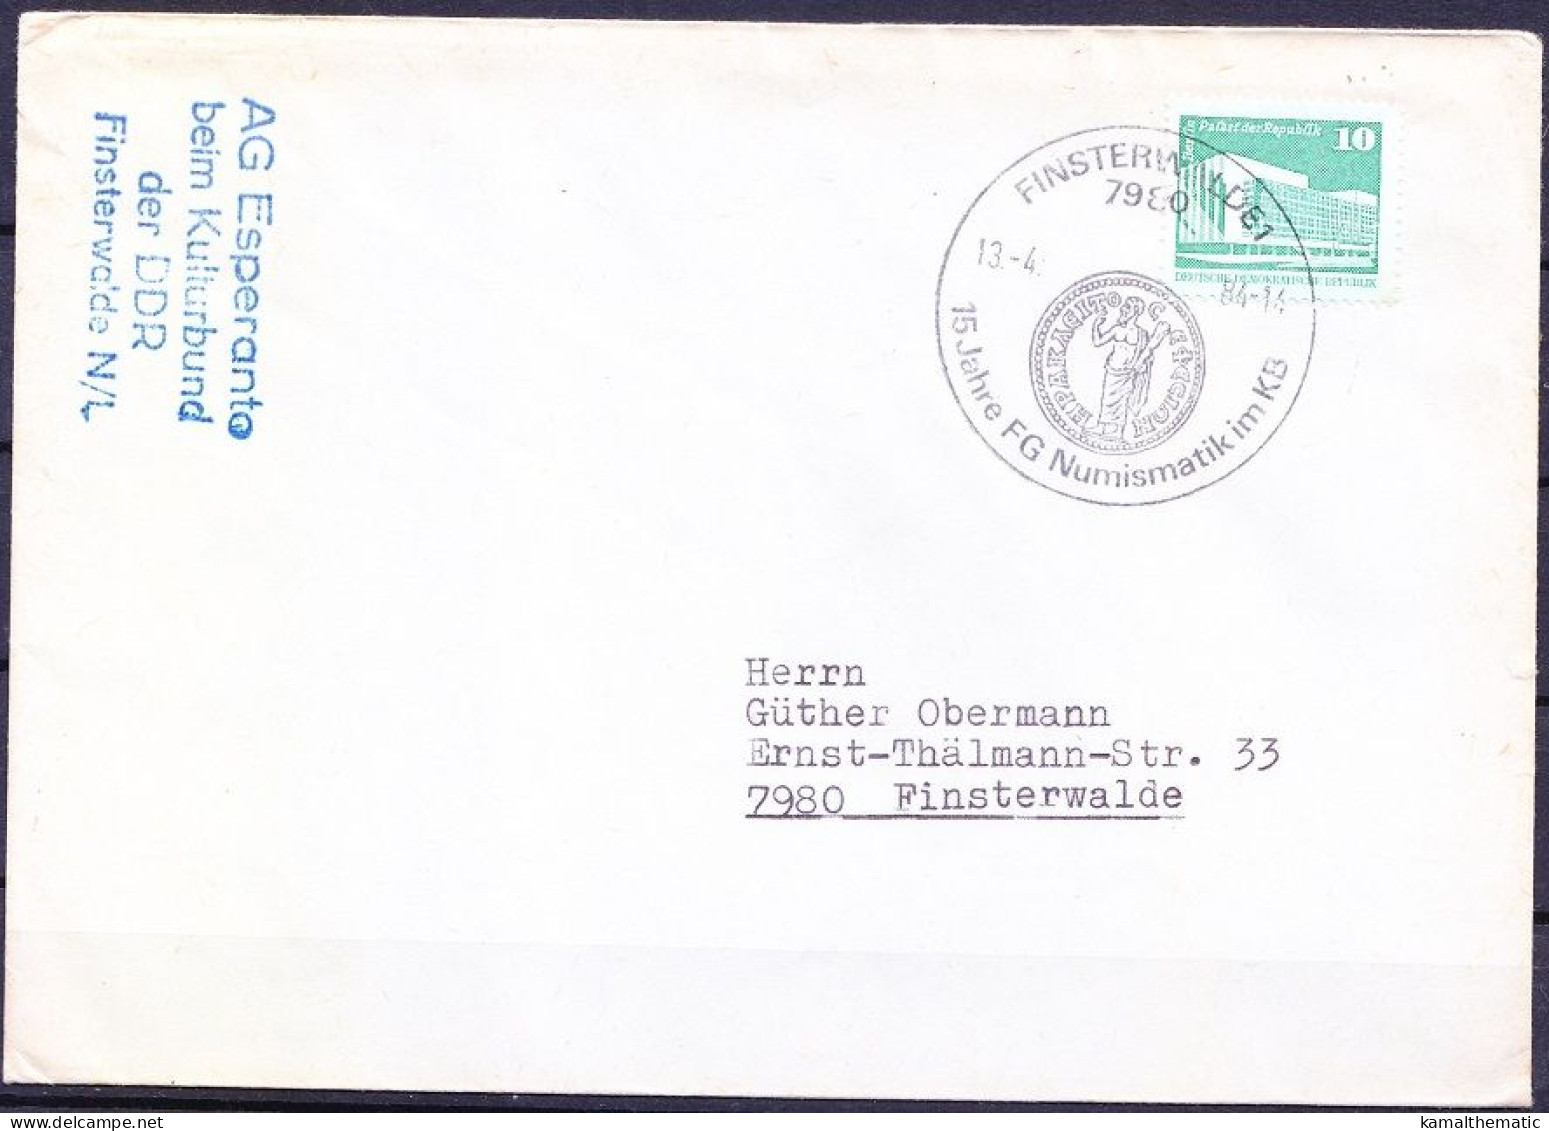 Germany 1984 Used Cover Pictorial Cancellation Numismatics - Study Of Currency Coins - Münzen